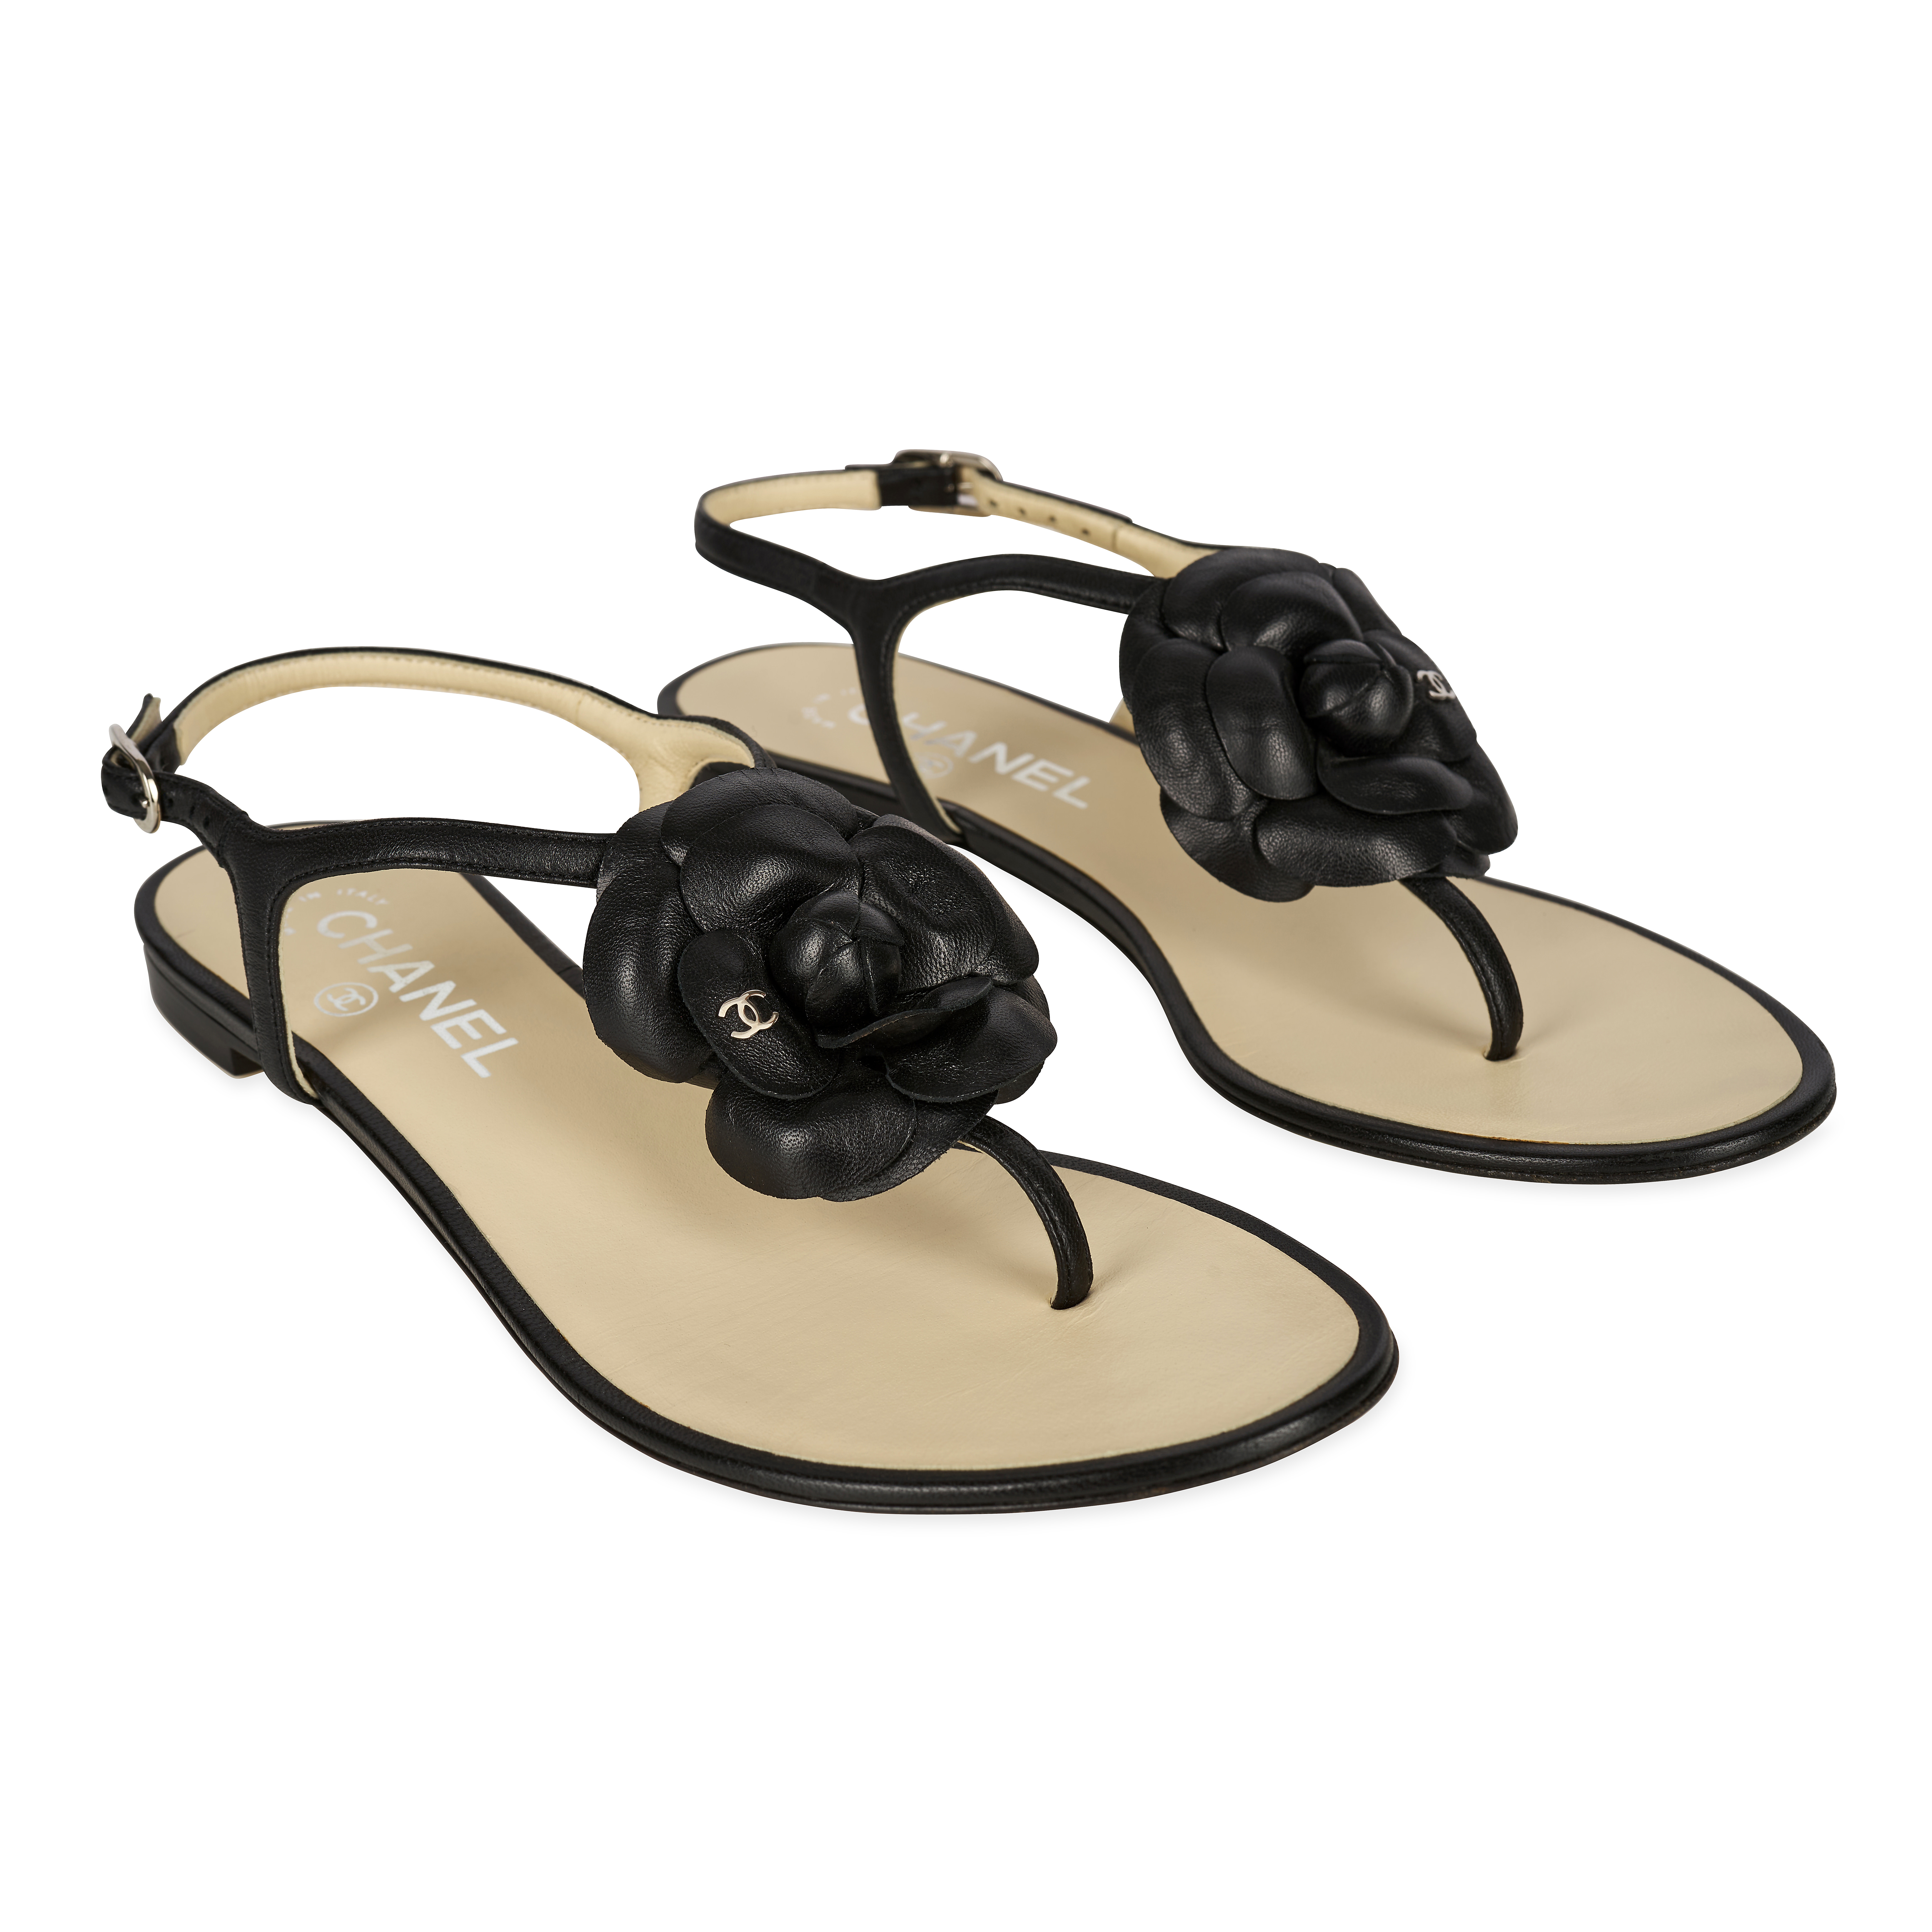 CHANEL CAMELLIA BEIGE AND BLACK SANDALS  Condition grade A-.  Size 37.5C. Black and beige leath...